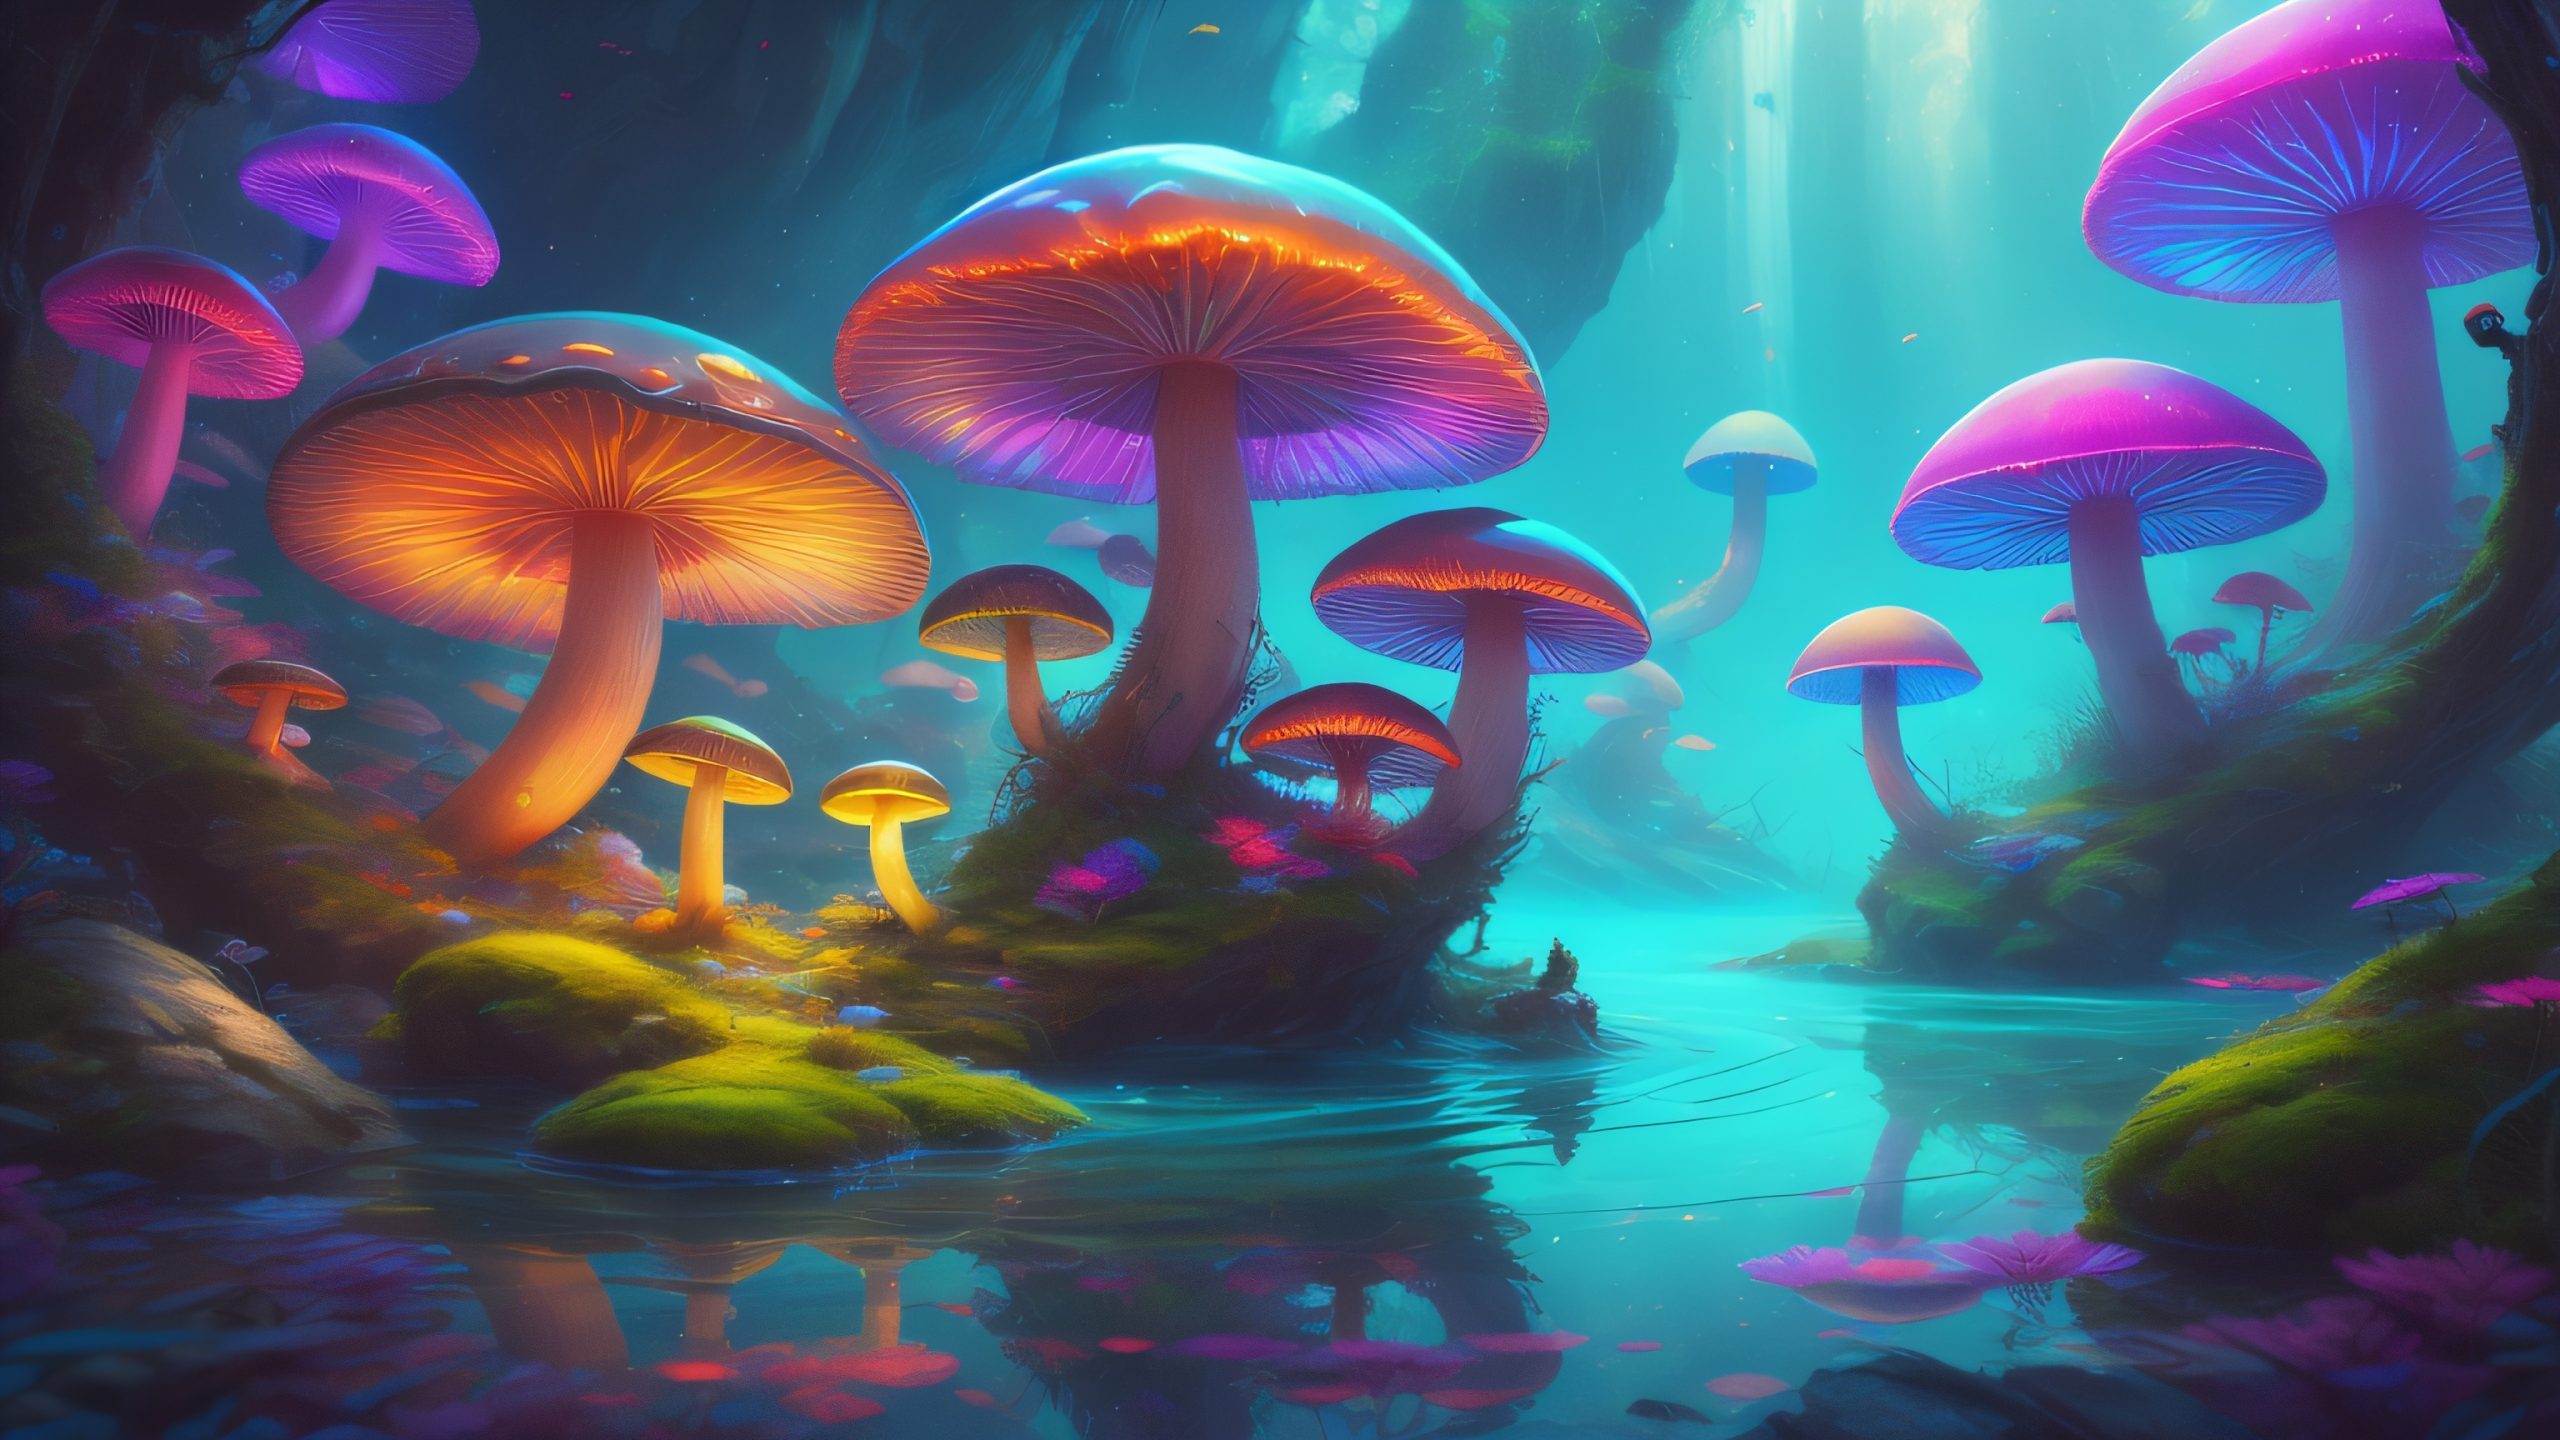 The Magical World of Mushroom Intelligence for Healing and Planetary Harmony